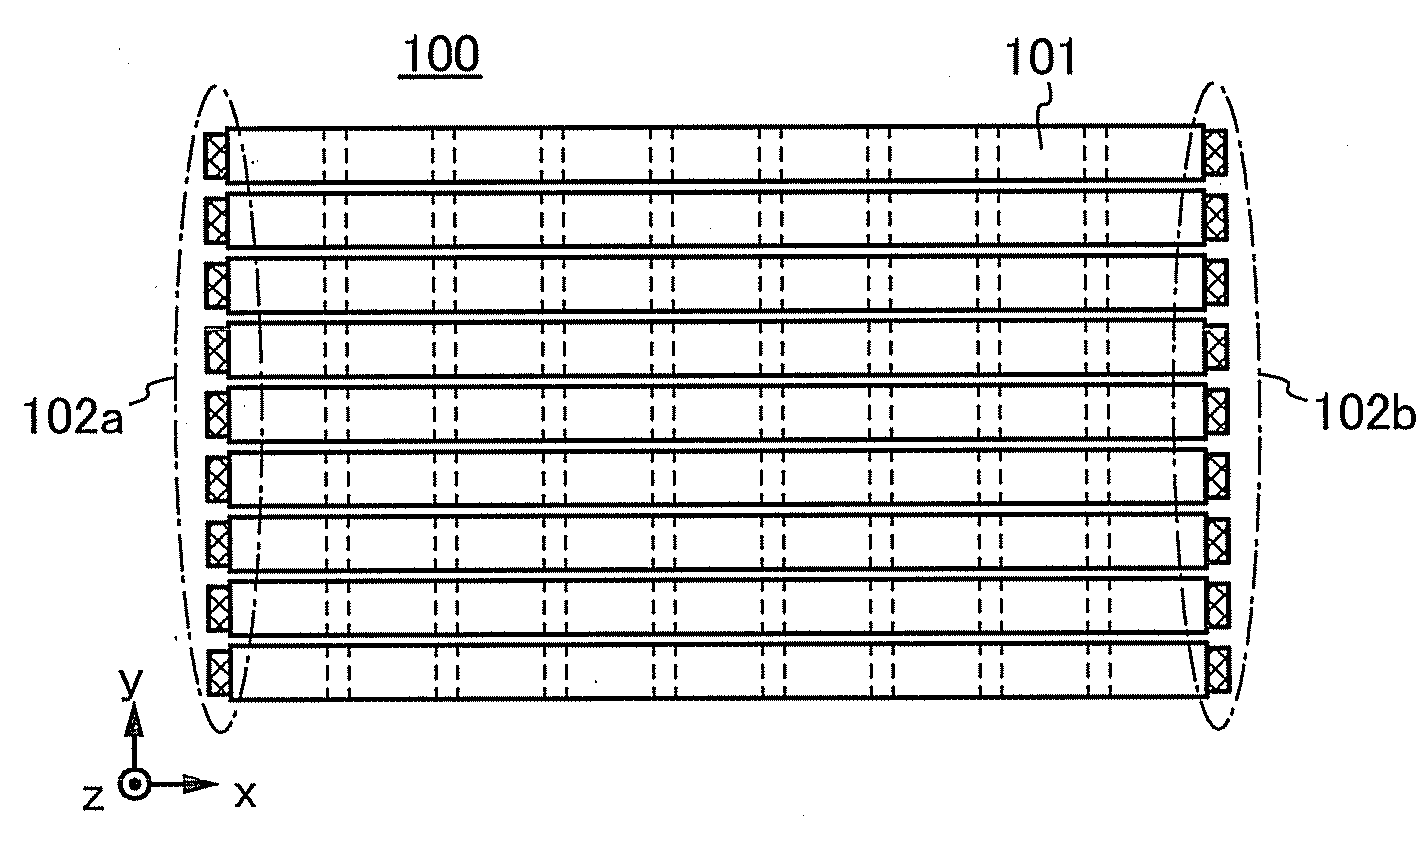 Light Guide Element, Backlight Unit, and Display Device